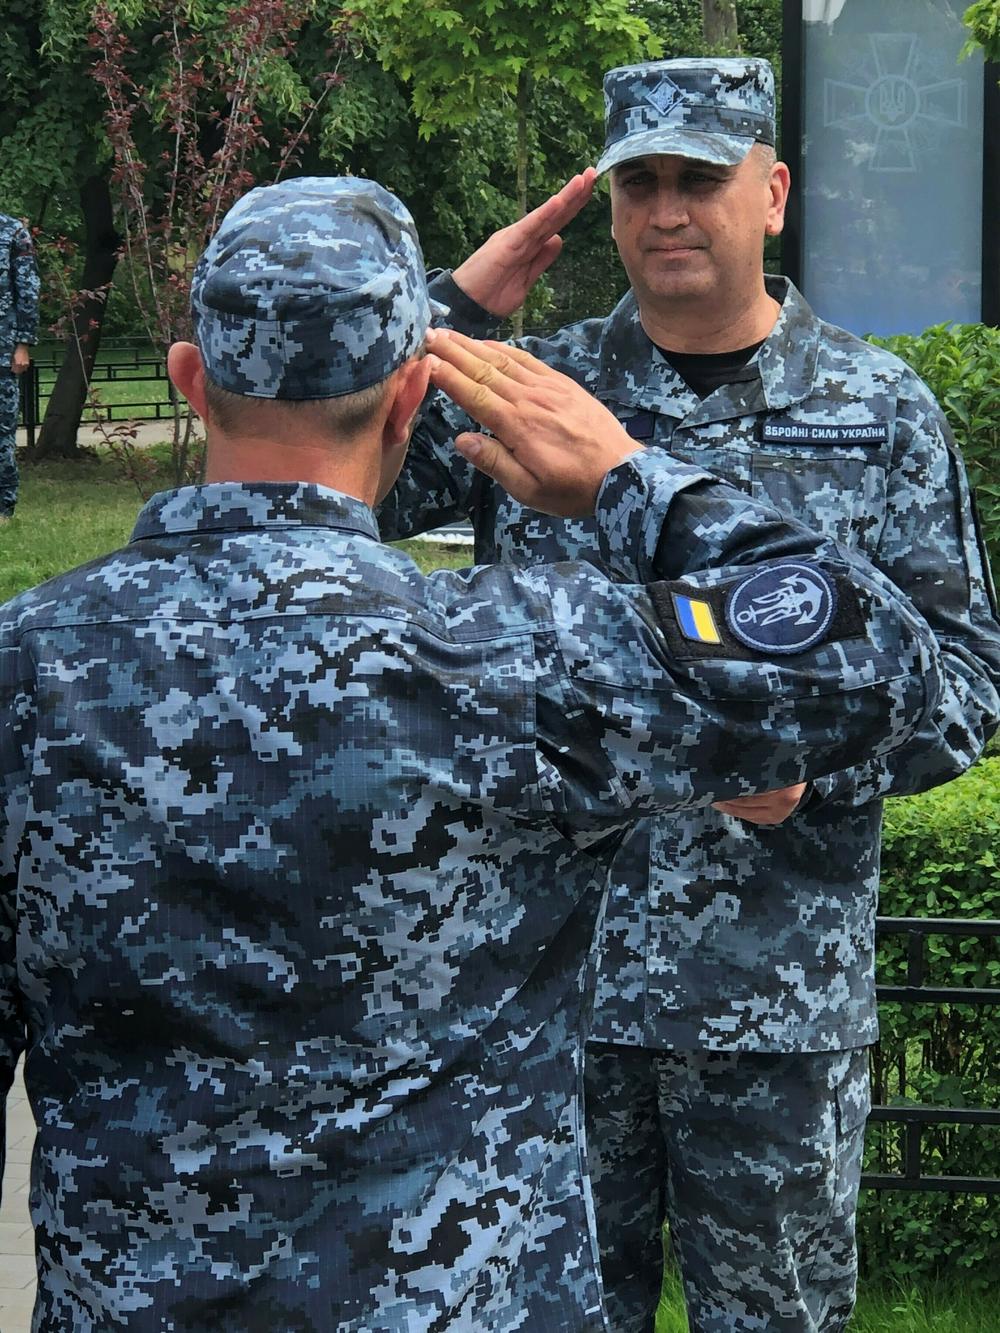 The commander of the Ukrainian navy, Vice Adm. Oleksiy Neizhpapa, at a ceremony honoring sailors in Kyiv in July.